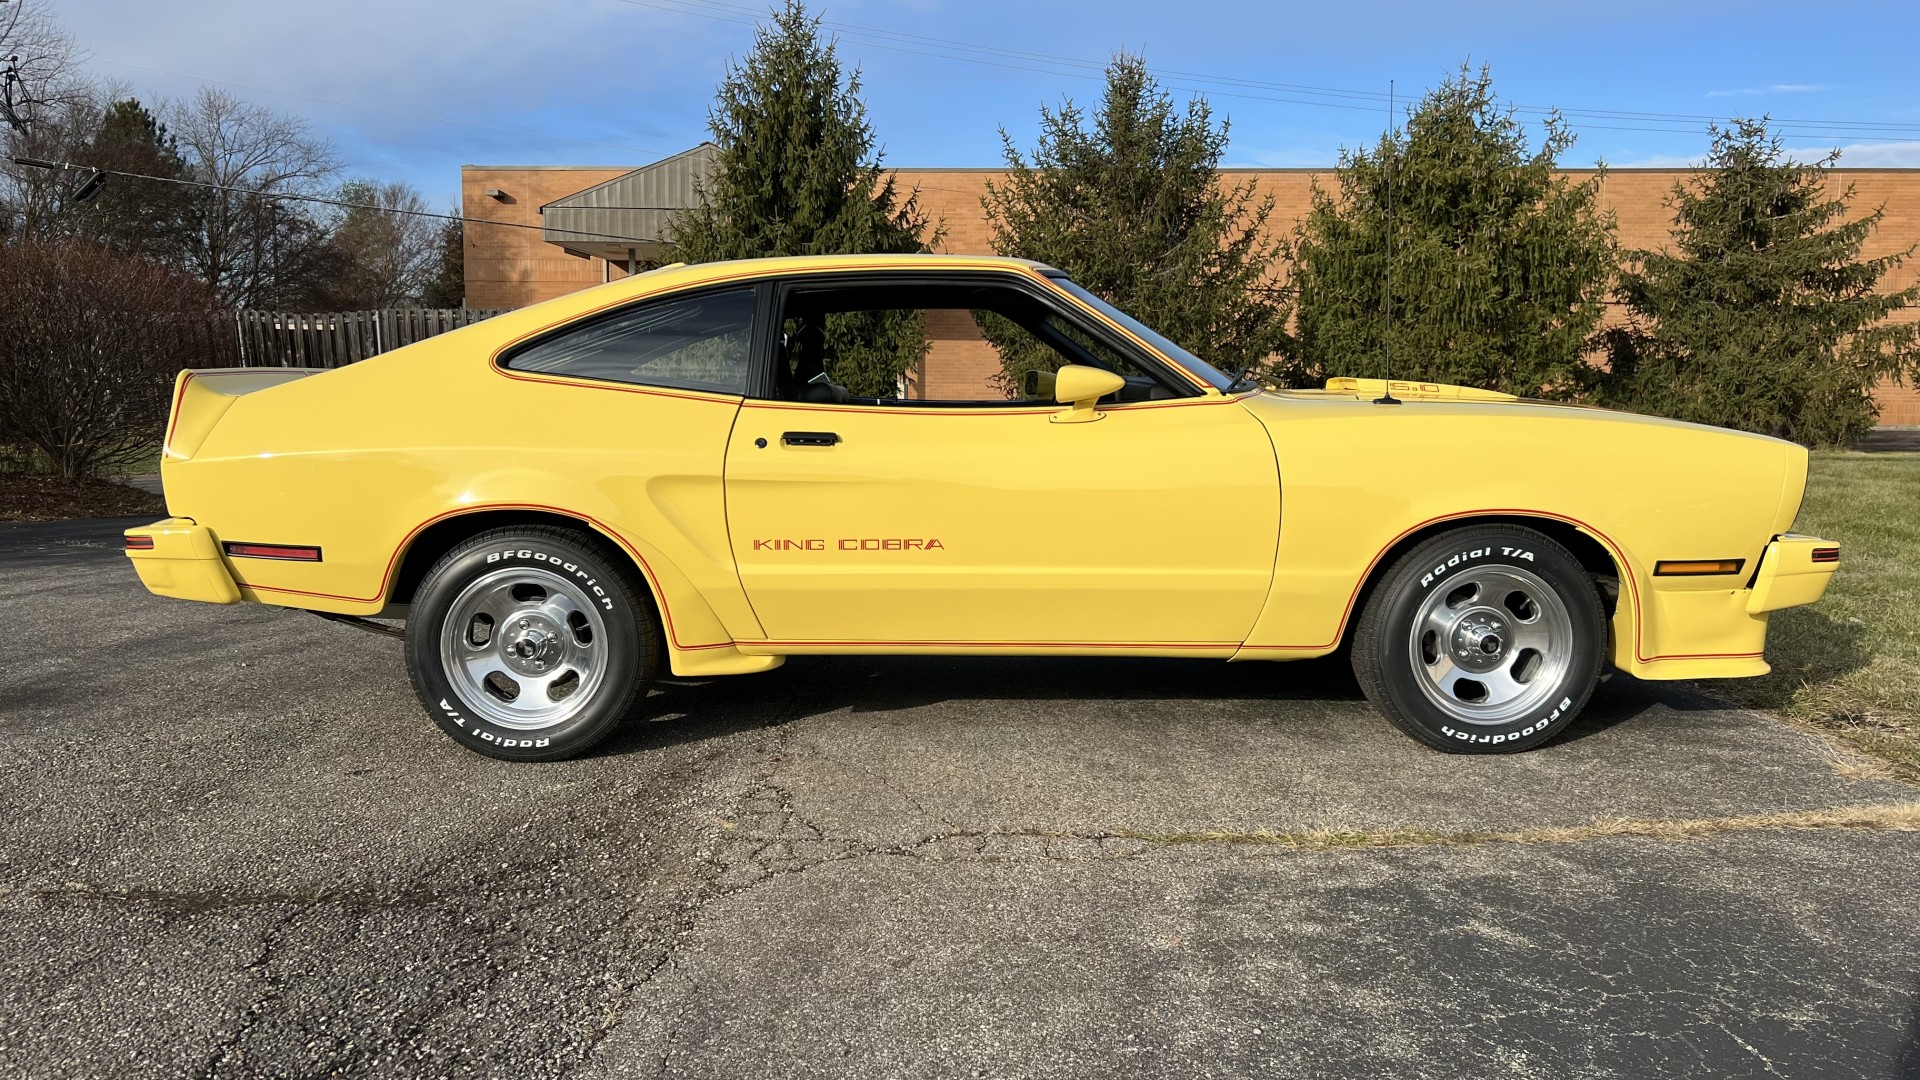 1978 Mustang King Cobra, Factory Yellow 4 Speed, SOLD!